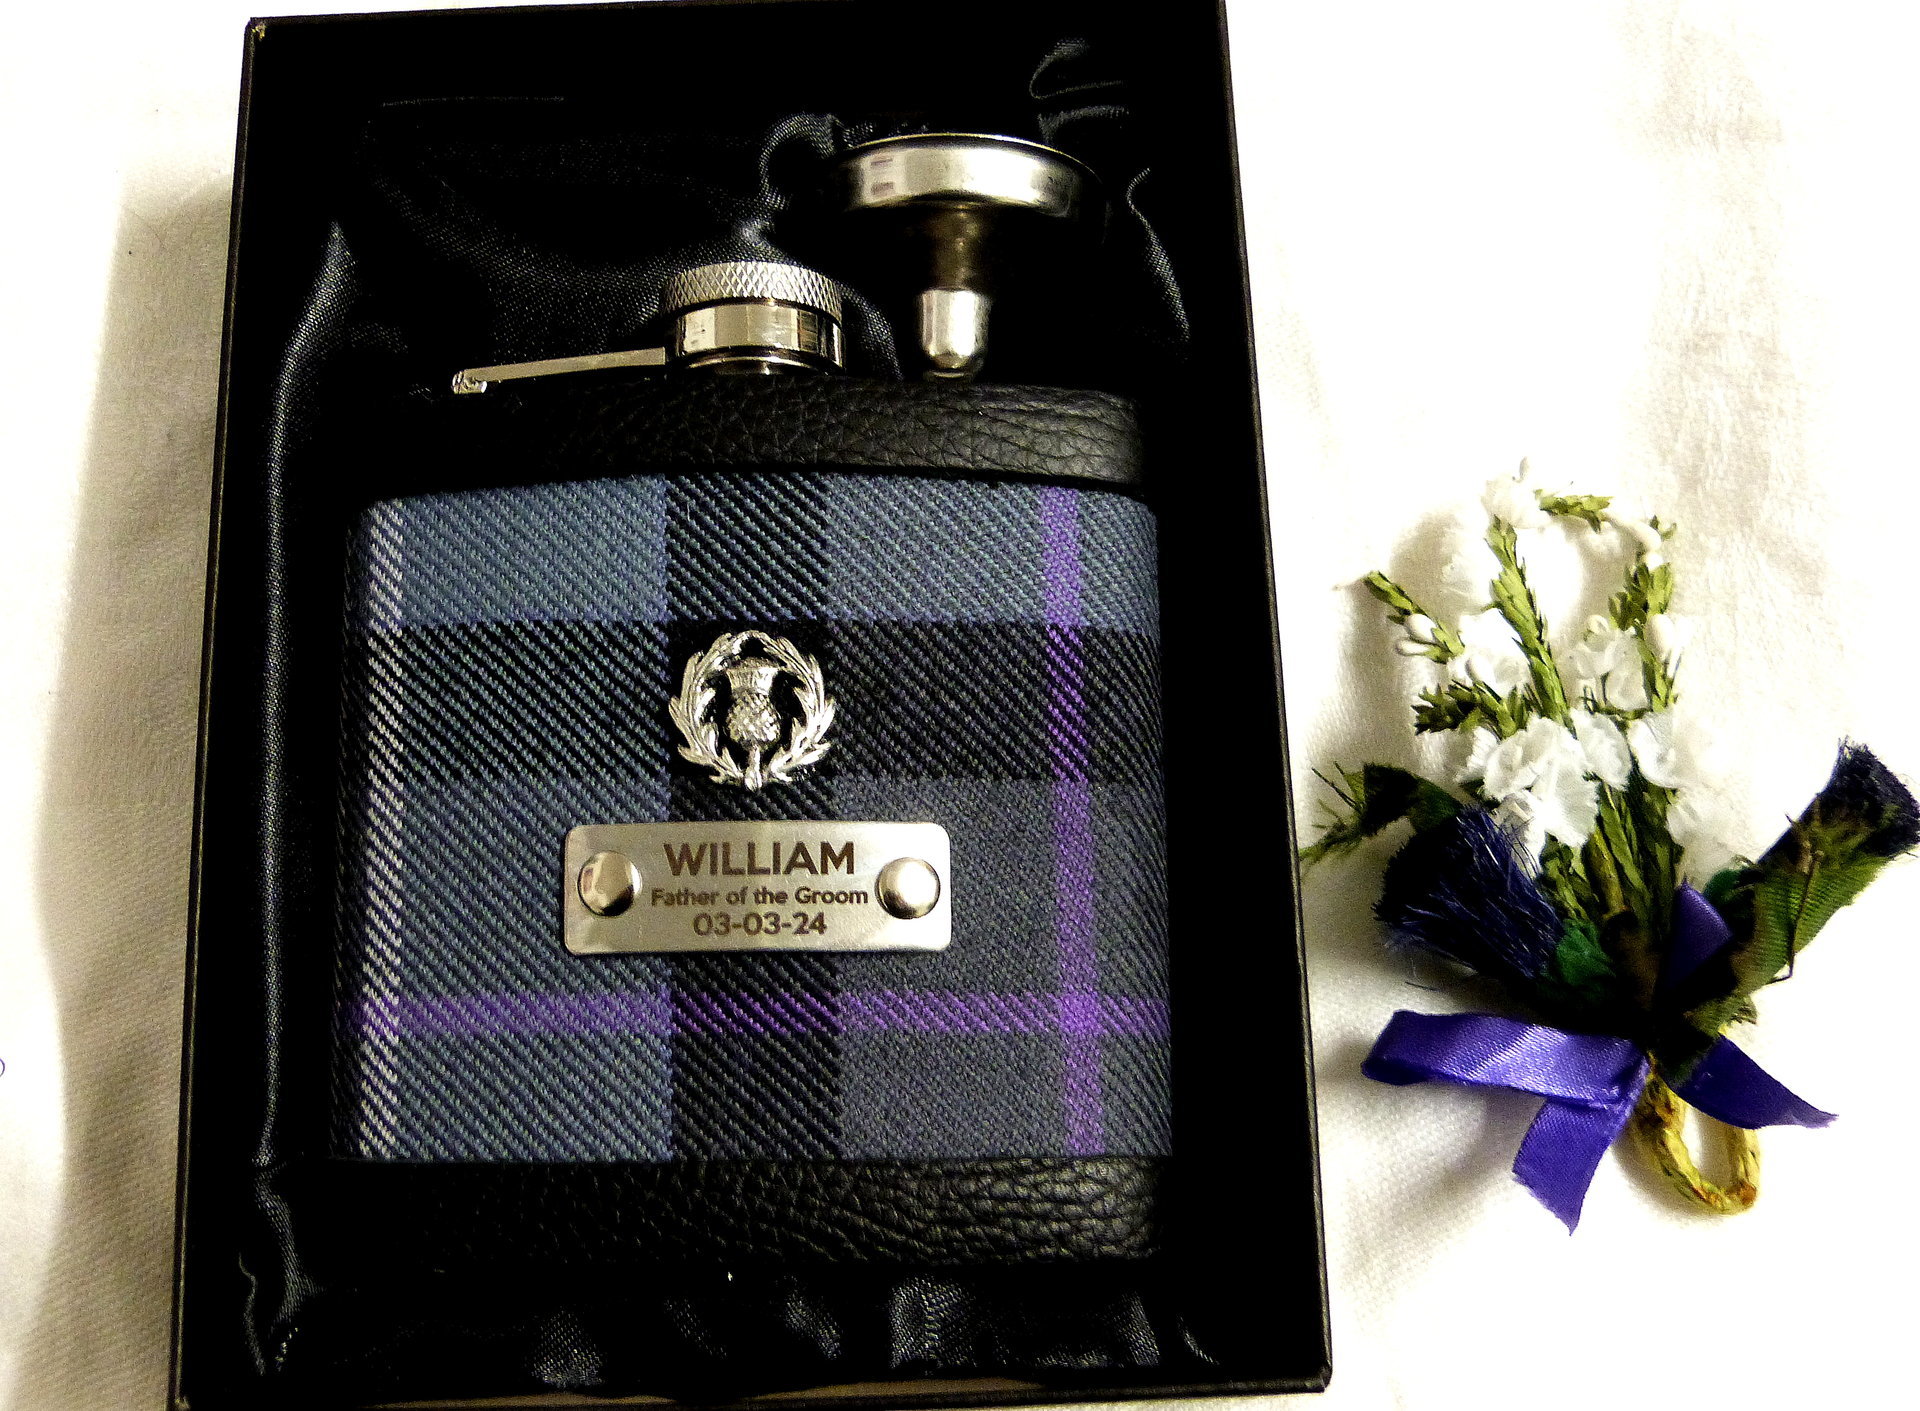 Custom listing for James. Set of & Ayrshire Silver tartan flasks, thistles and engraving as requested